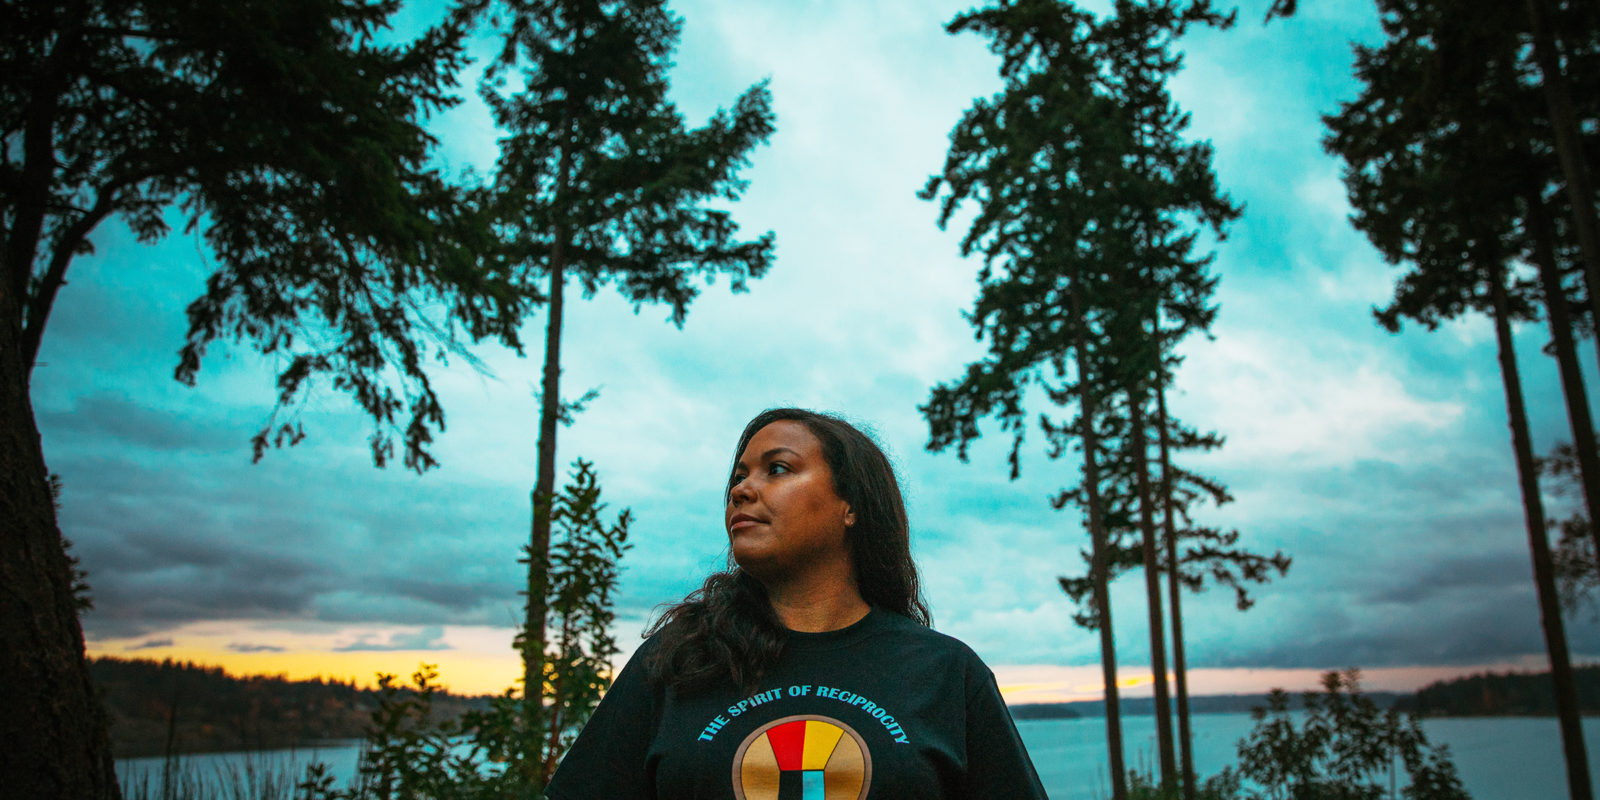 Potlatch Fund’s former Development and Communications Manager Damara Jacobs-Morris looking off to the left with the backdrop of trees and sea behind her. Potlatch Fund uplifts a longstanding native giving tradition to support community philantropy.